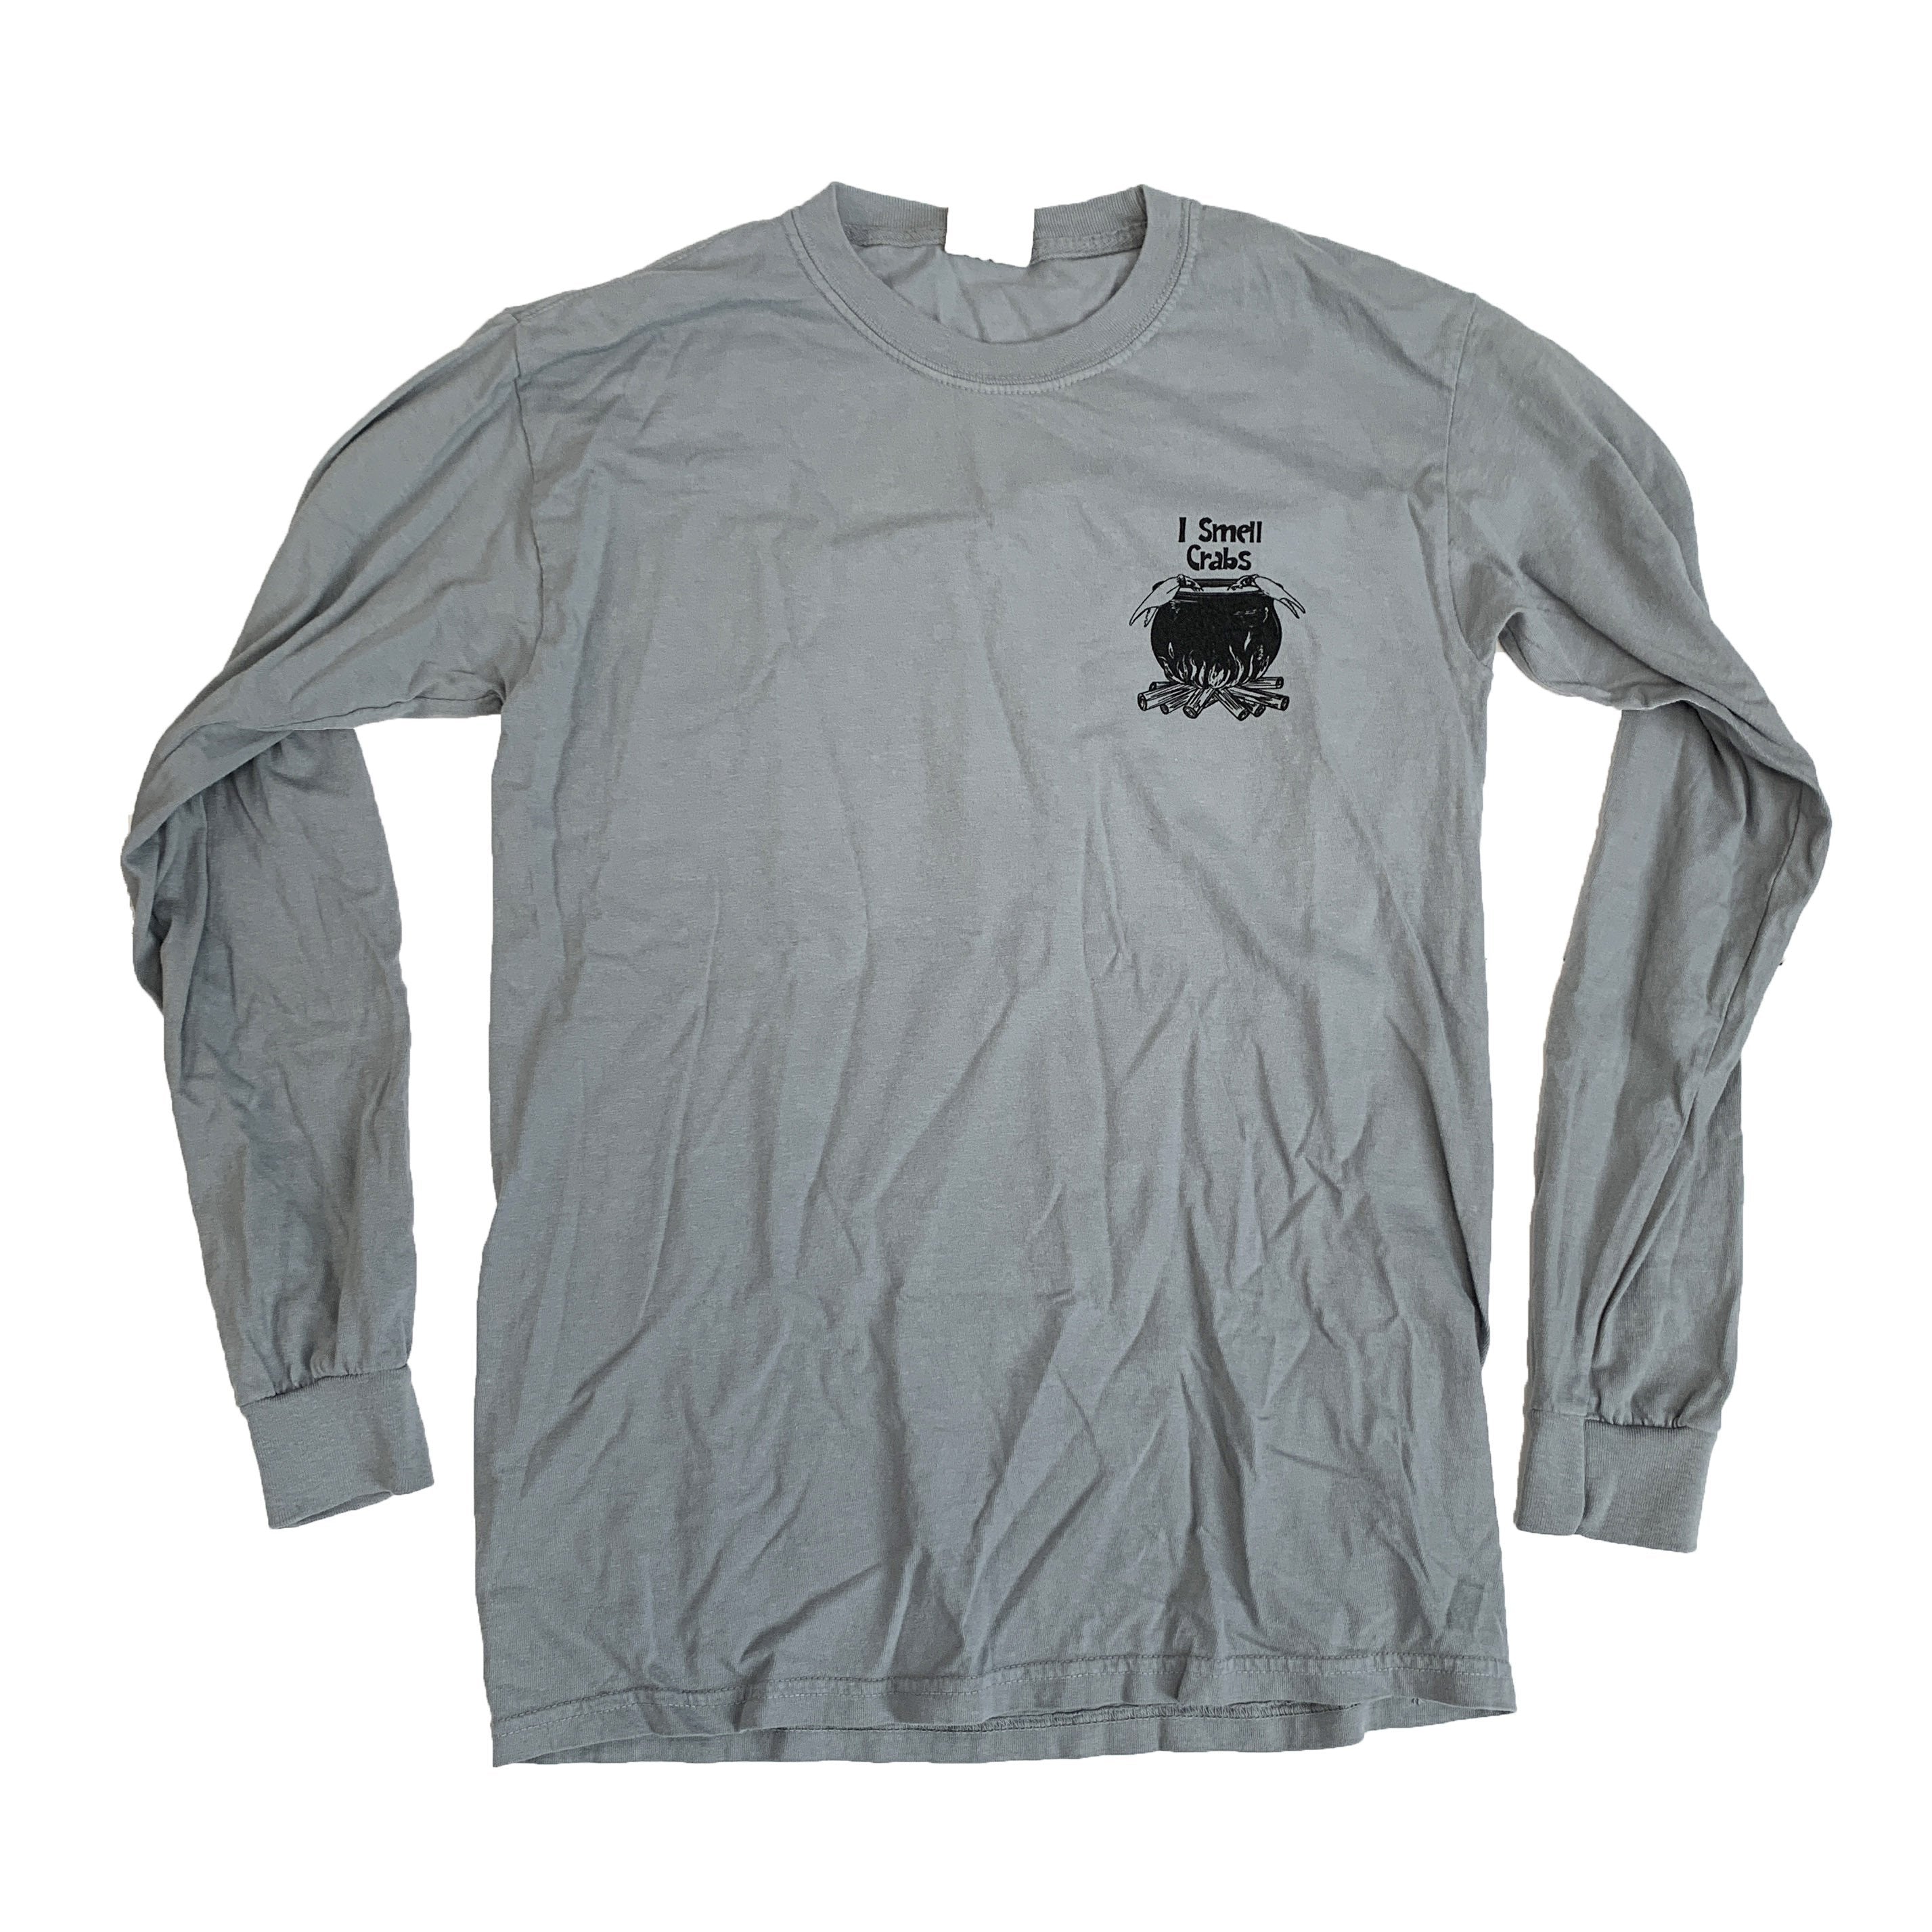 I Smell Crabs (Granite) / Long Sleeve Shirt - Route One Apparel